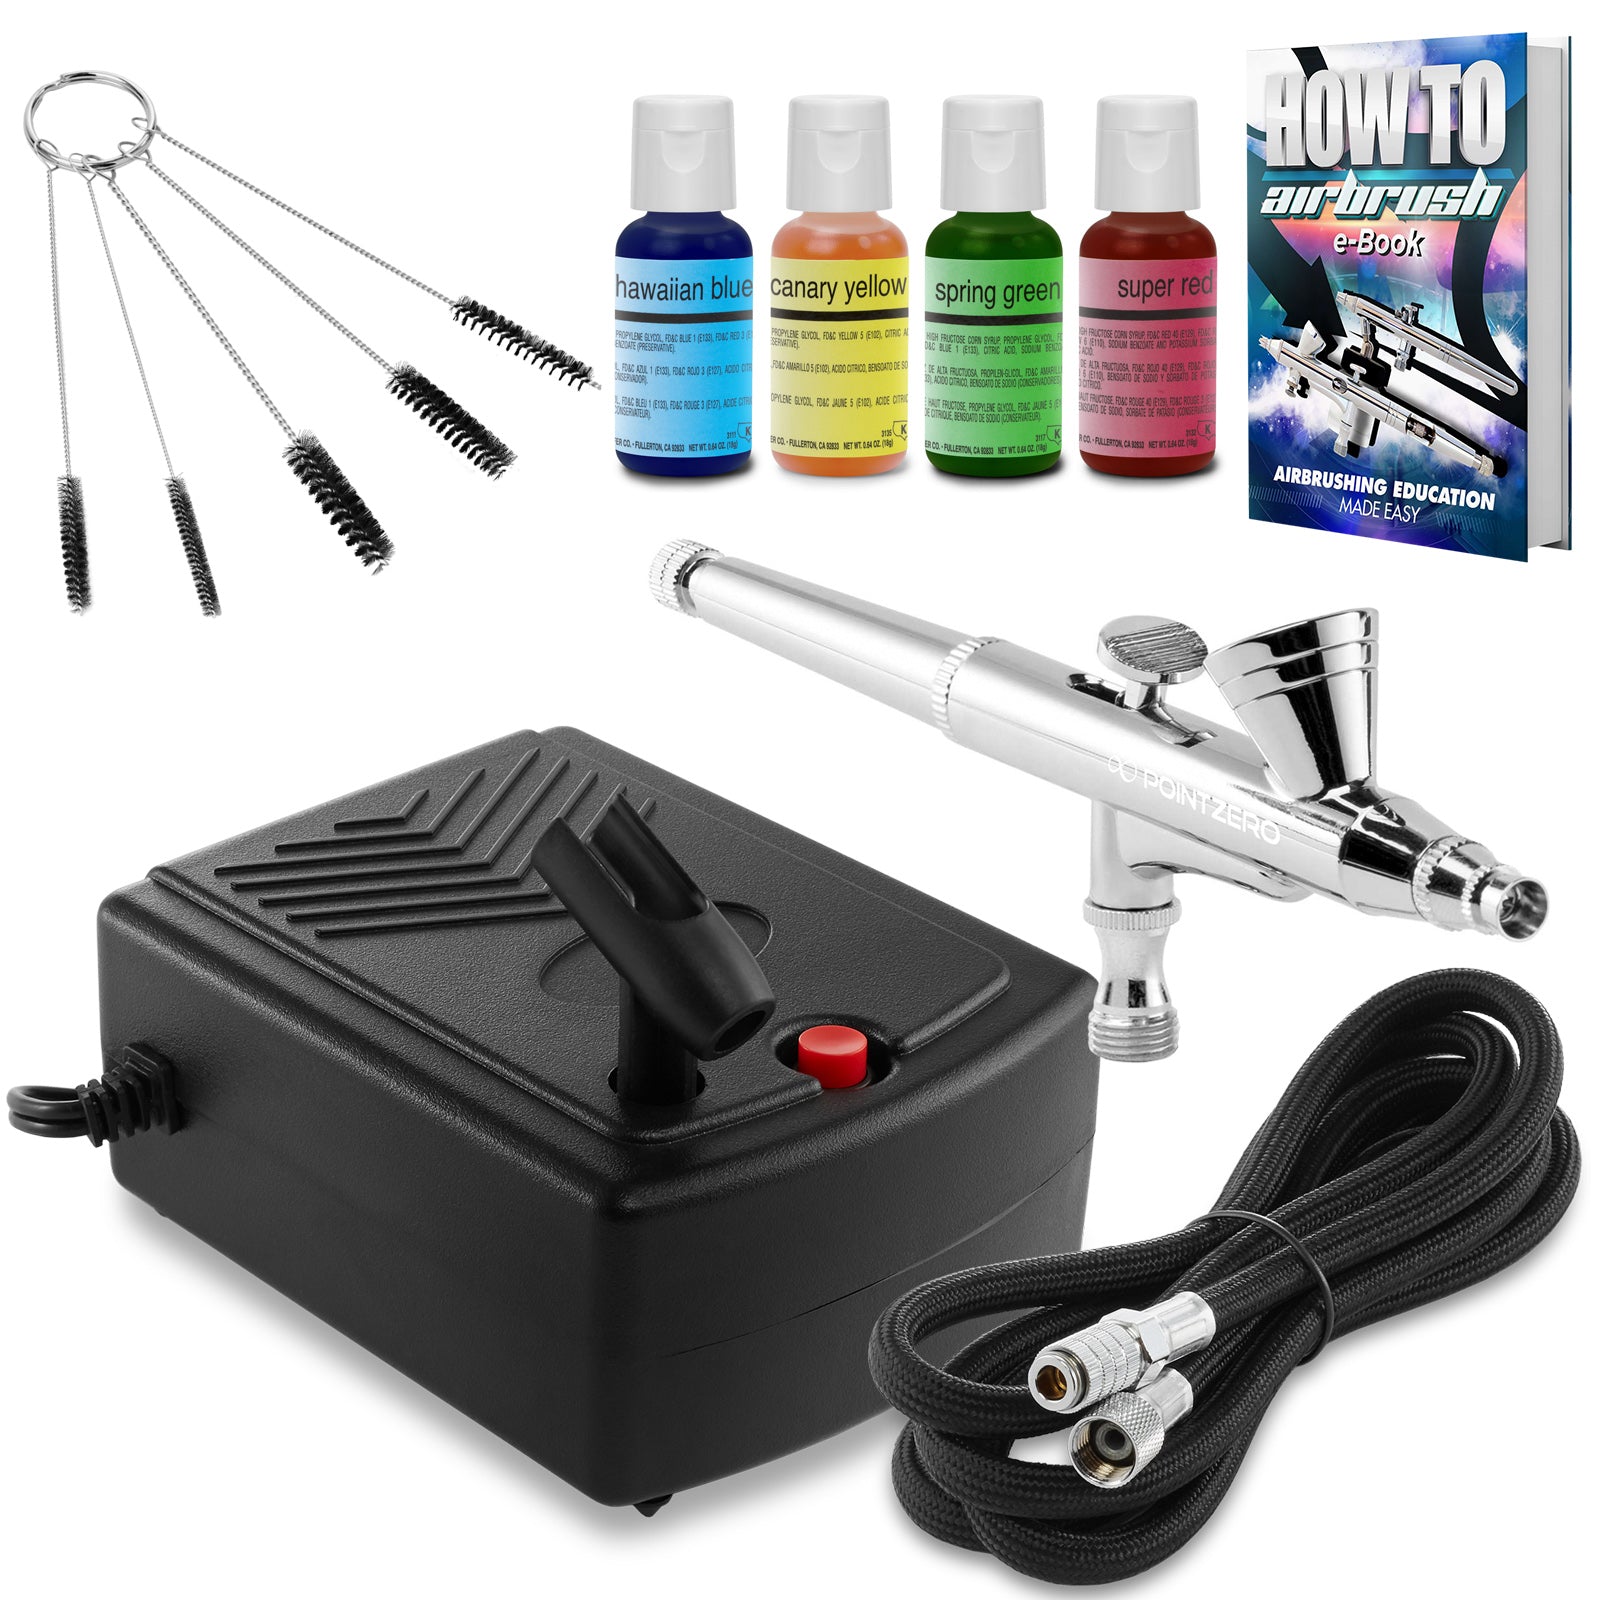 PointZero Airbrush Cleaning Kit with Cleaning Solution, Cleaning Pot Jar,  Cleaning Brushes, Nozzle Cleaning Needle, Plastic Bottle and Exclusive  Guides - Point Zero Airbrush